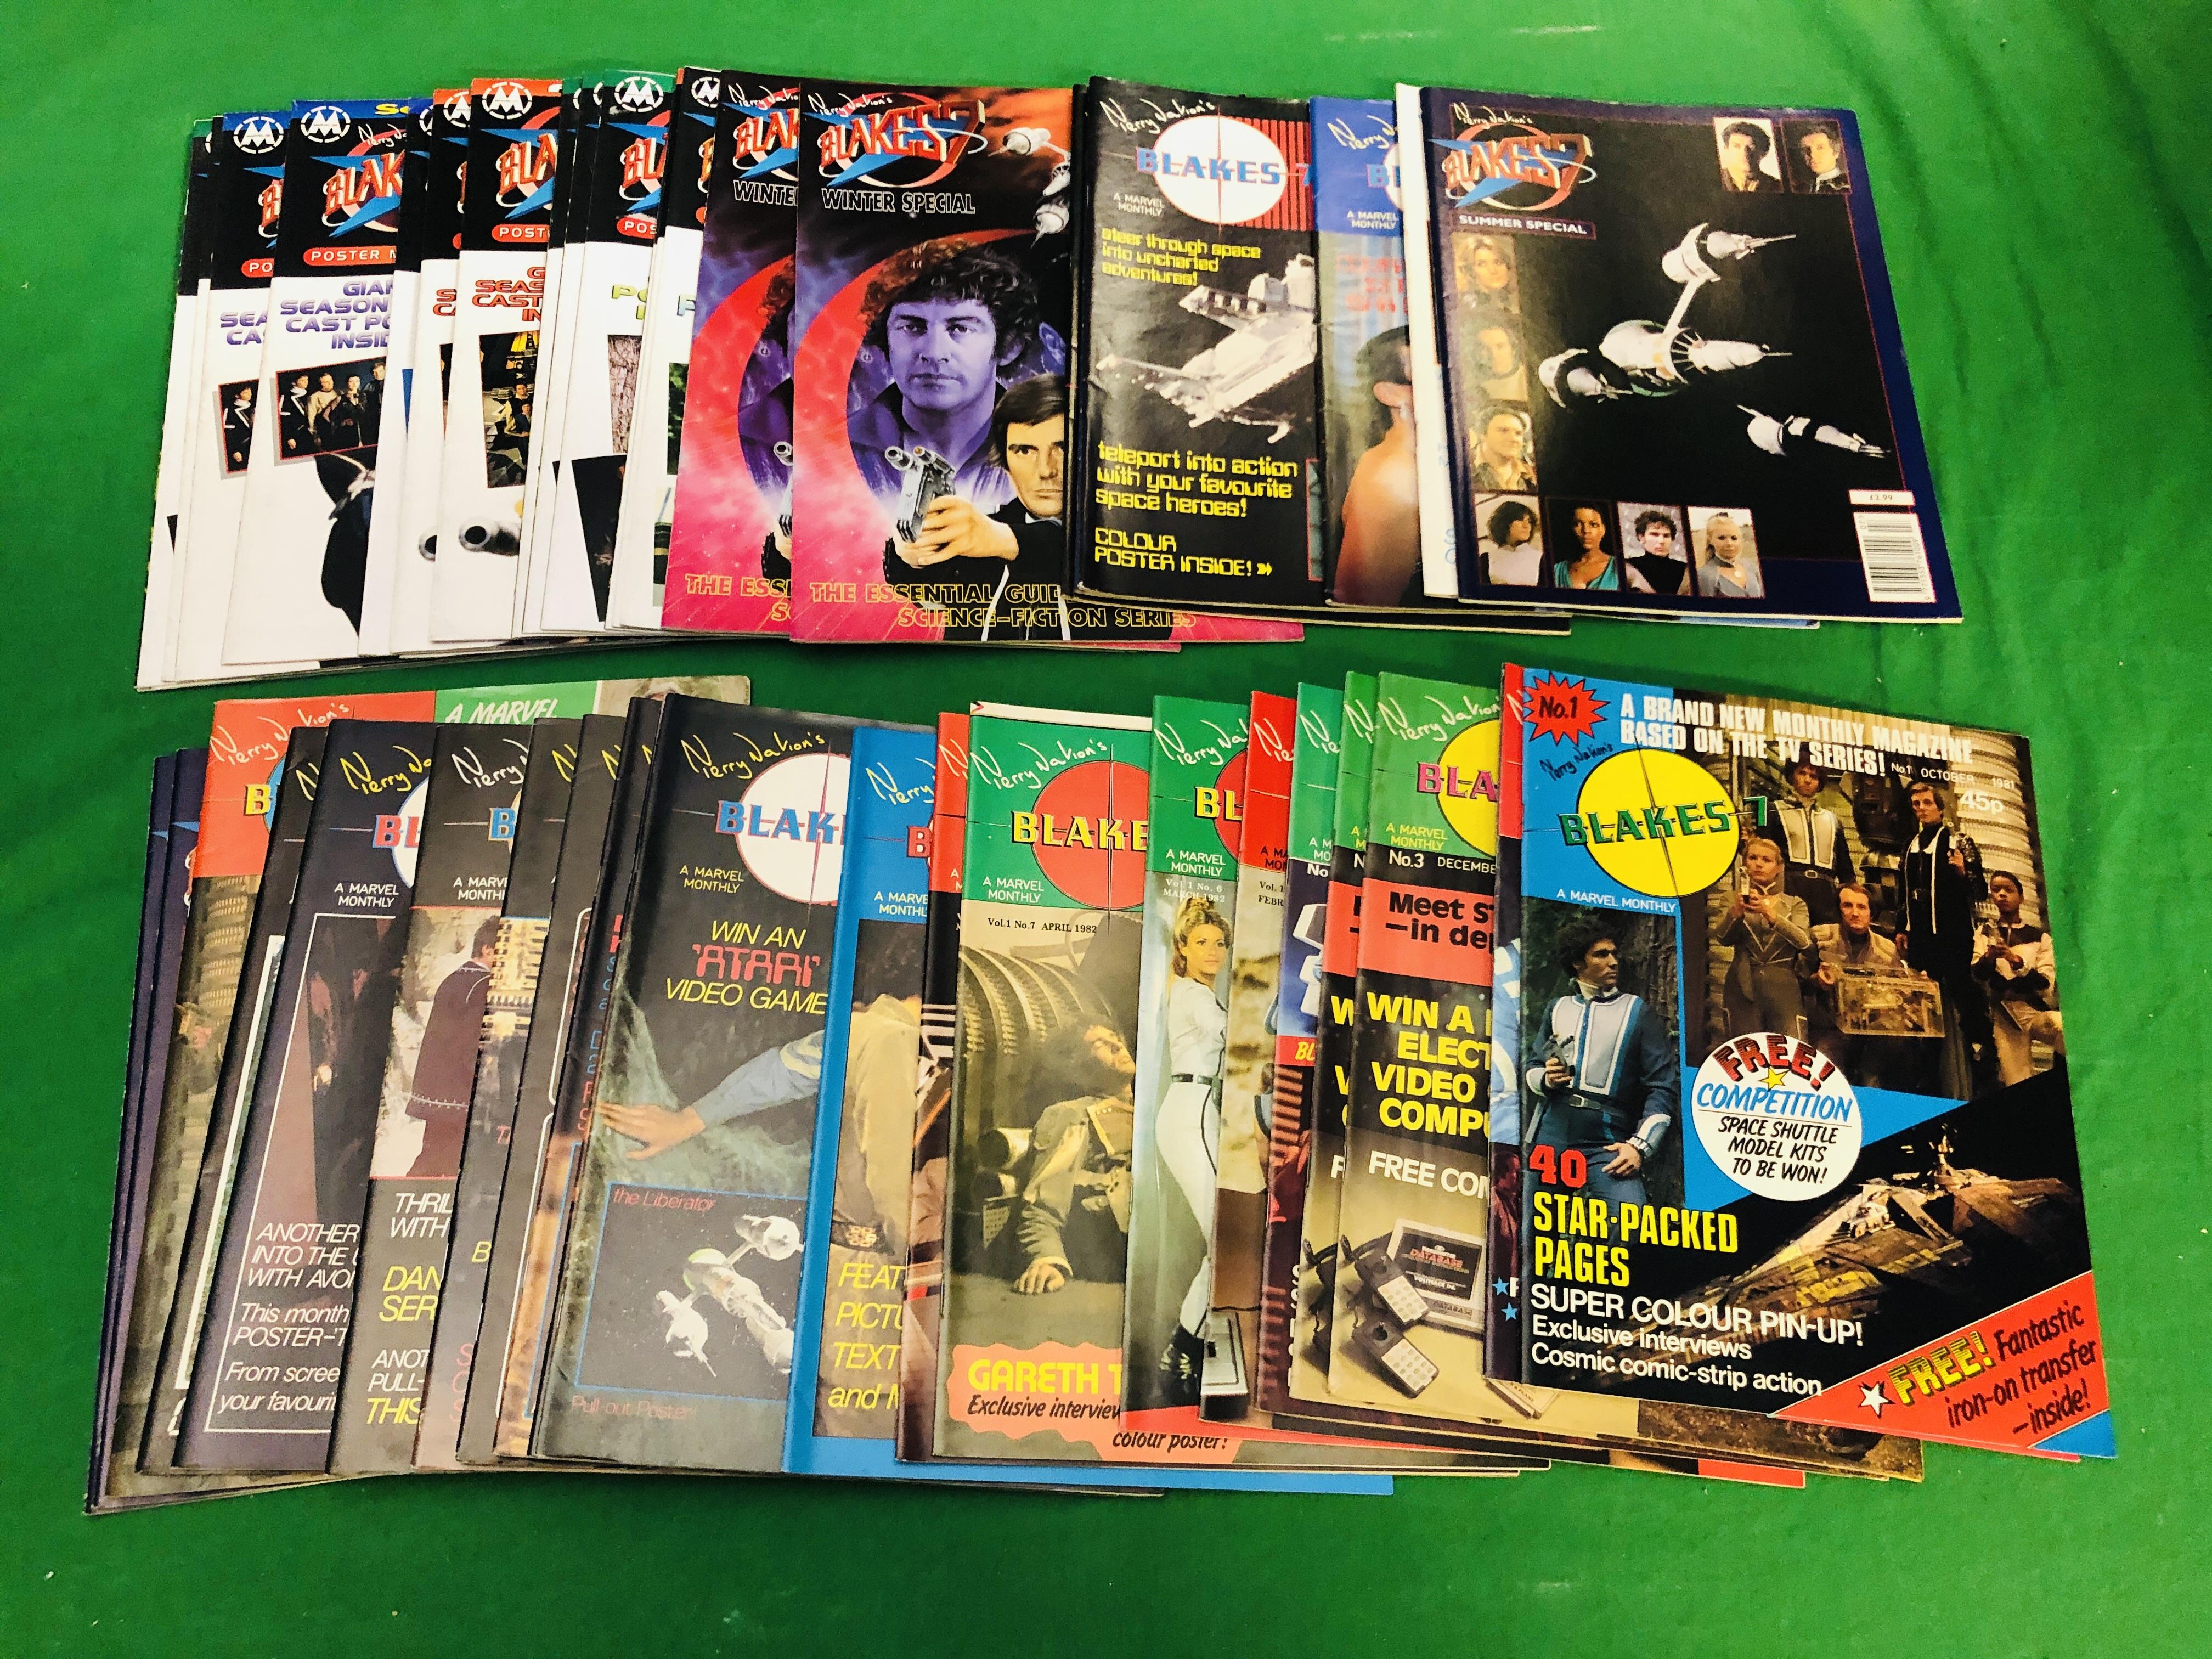 A COLLECTION GO MARVEL MONTHLY MAGAZINES BLAKES 7 NO.1 - 16, 18 - 22 ALSO BLAKES 7 SPECIALS 1981.